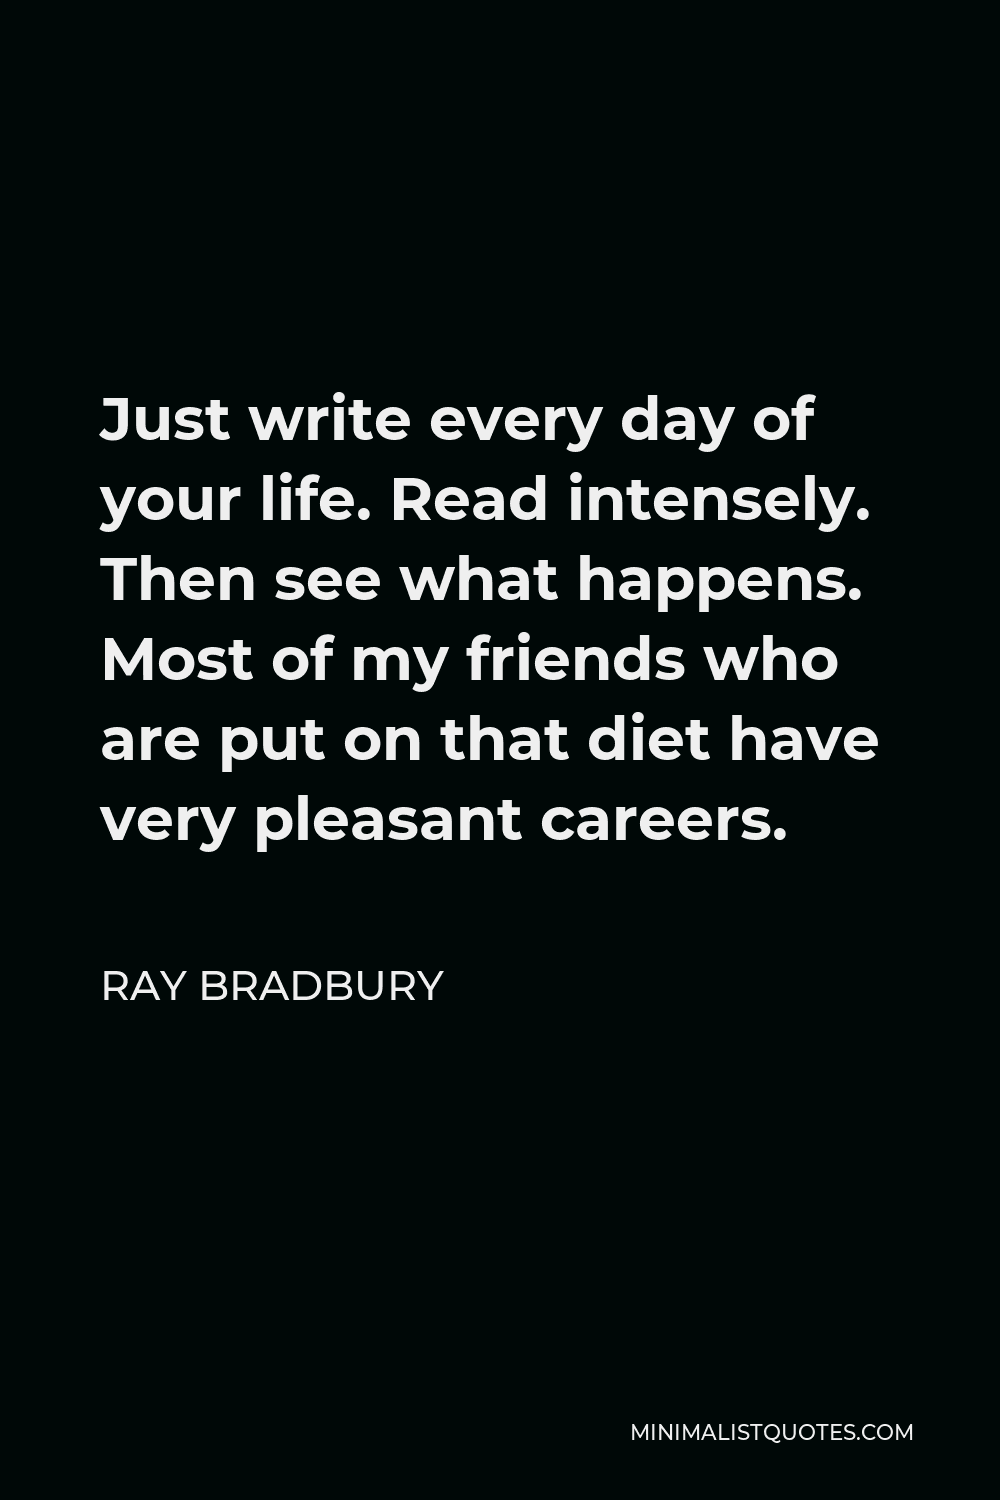 Ray Bradbury Quote - Just write every day of your life. Read intensely. Then see what happens. Most of my friends who are put on that diet have very pleasant careers.